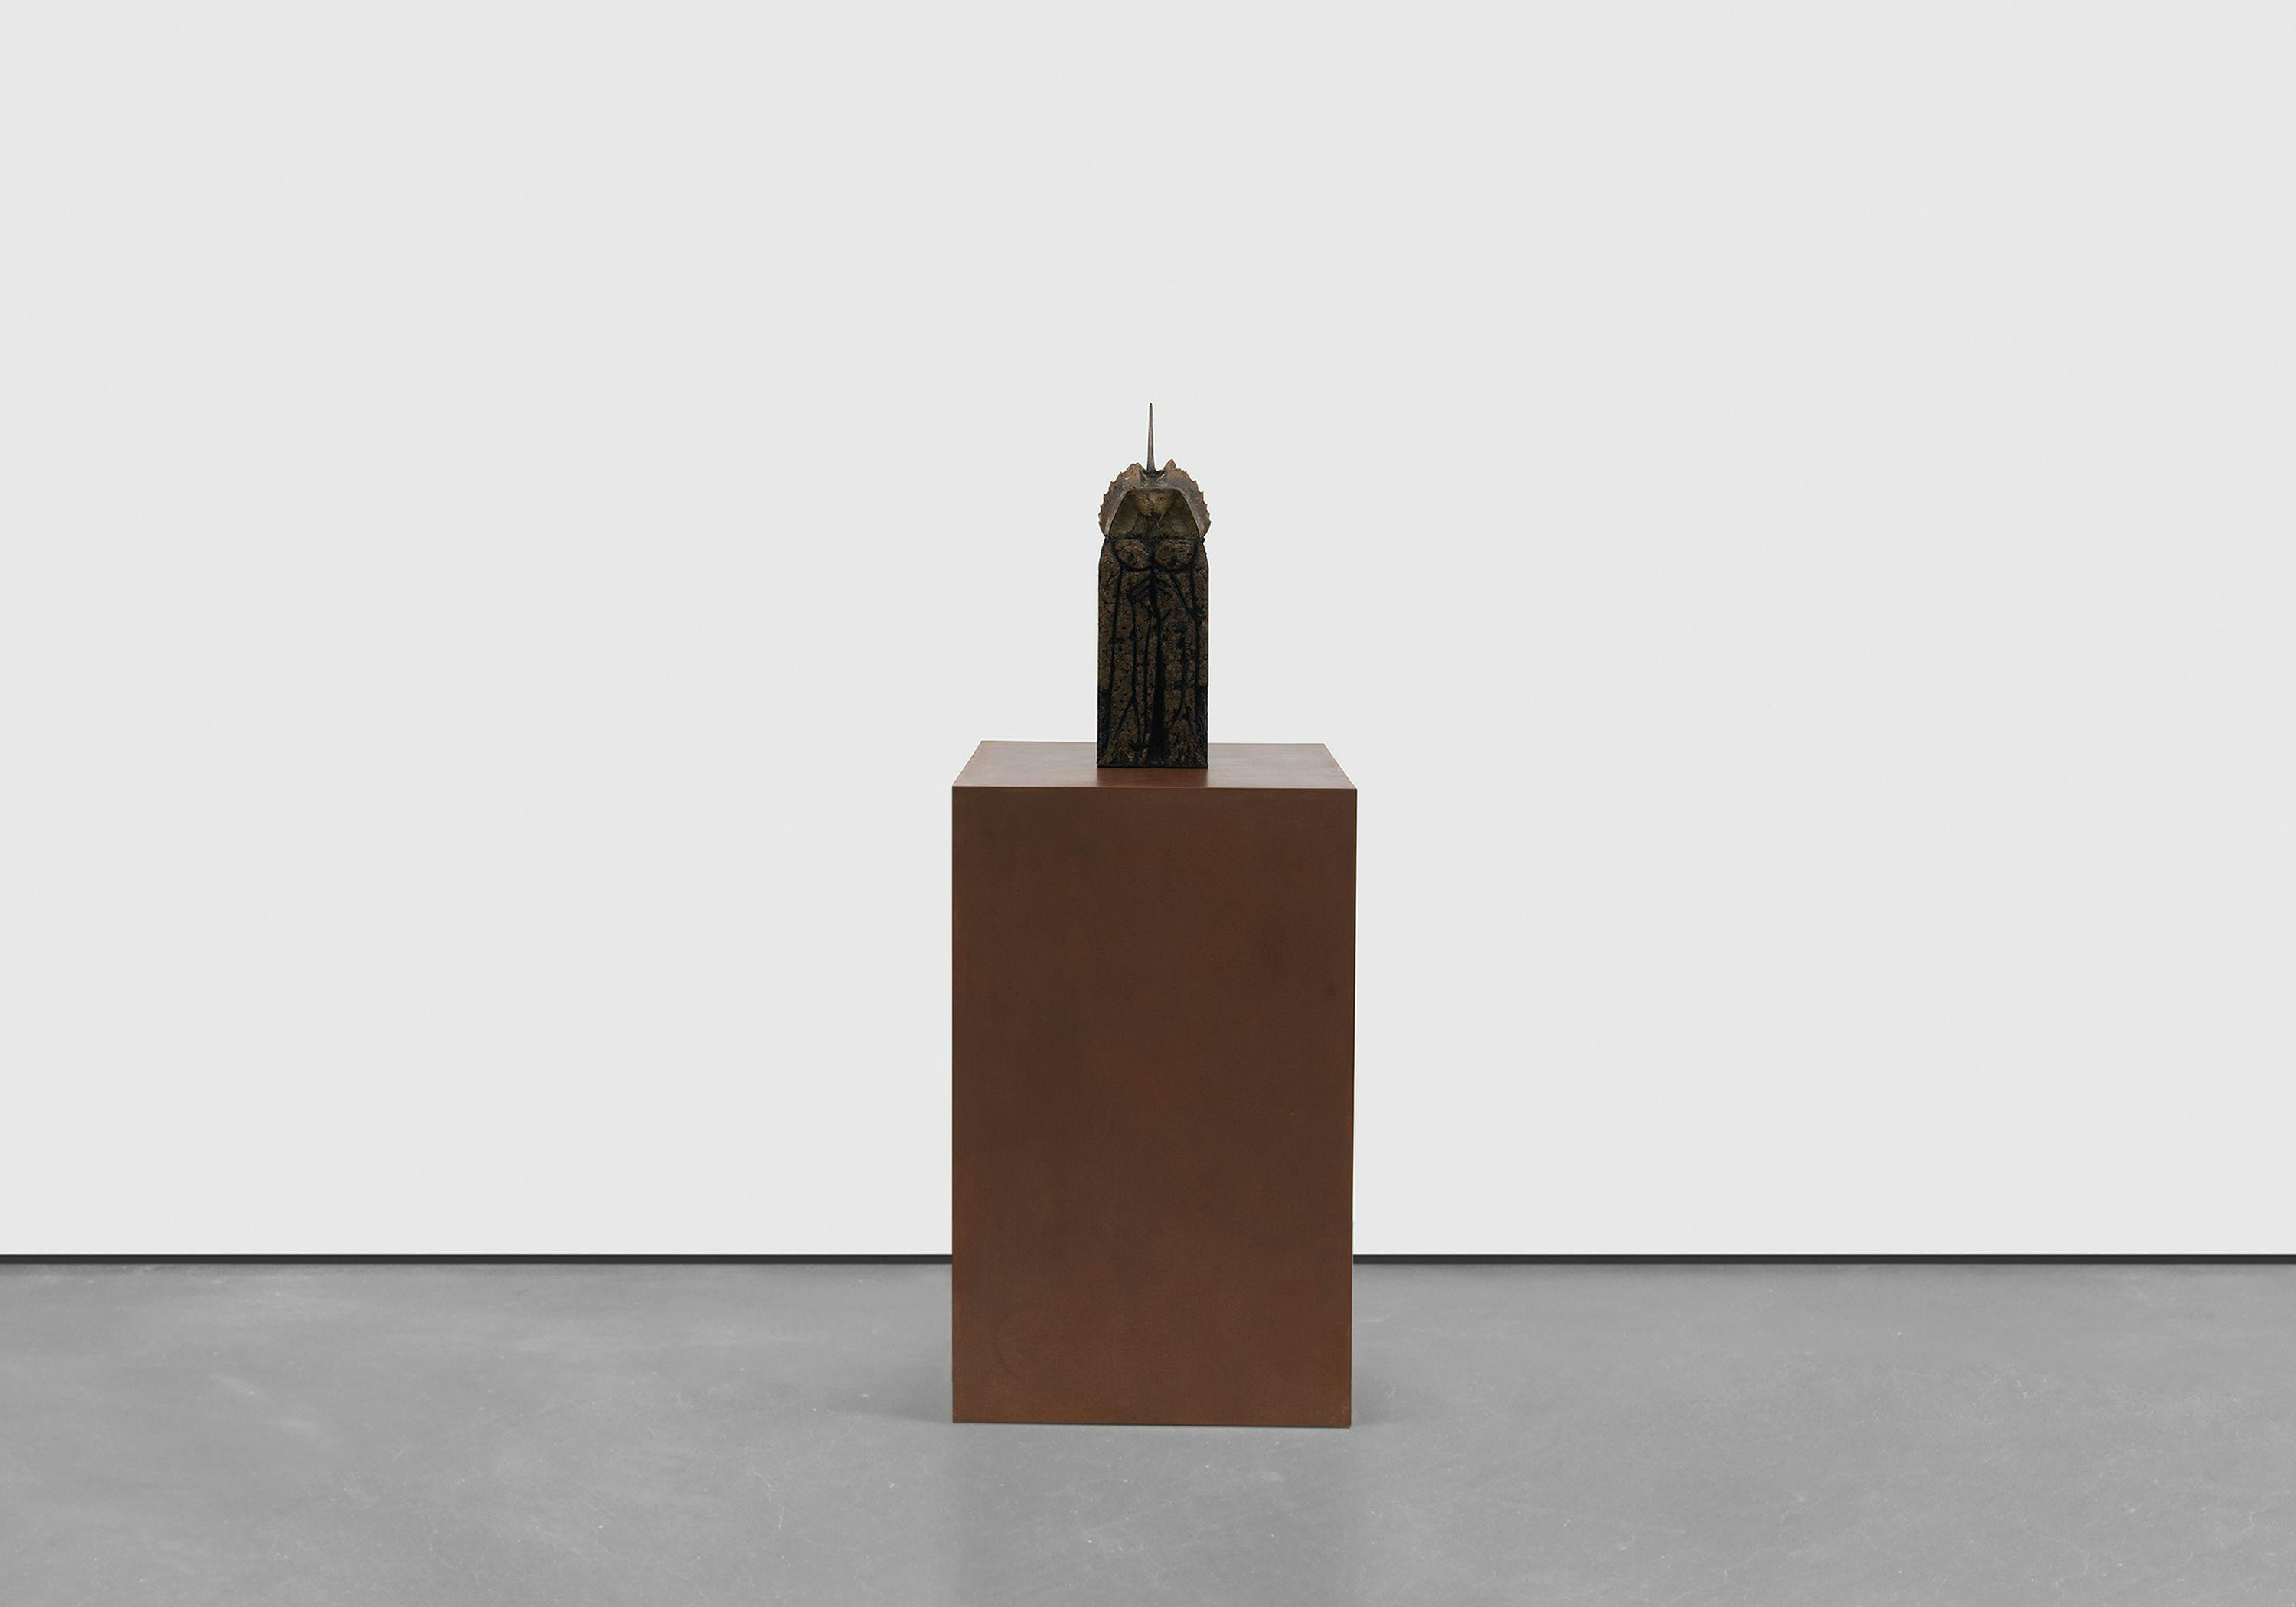 A sculpture by Huma Bhabha, titled Pathfinder, dated 2021.